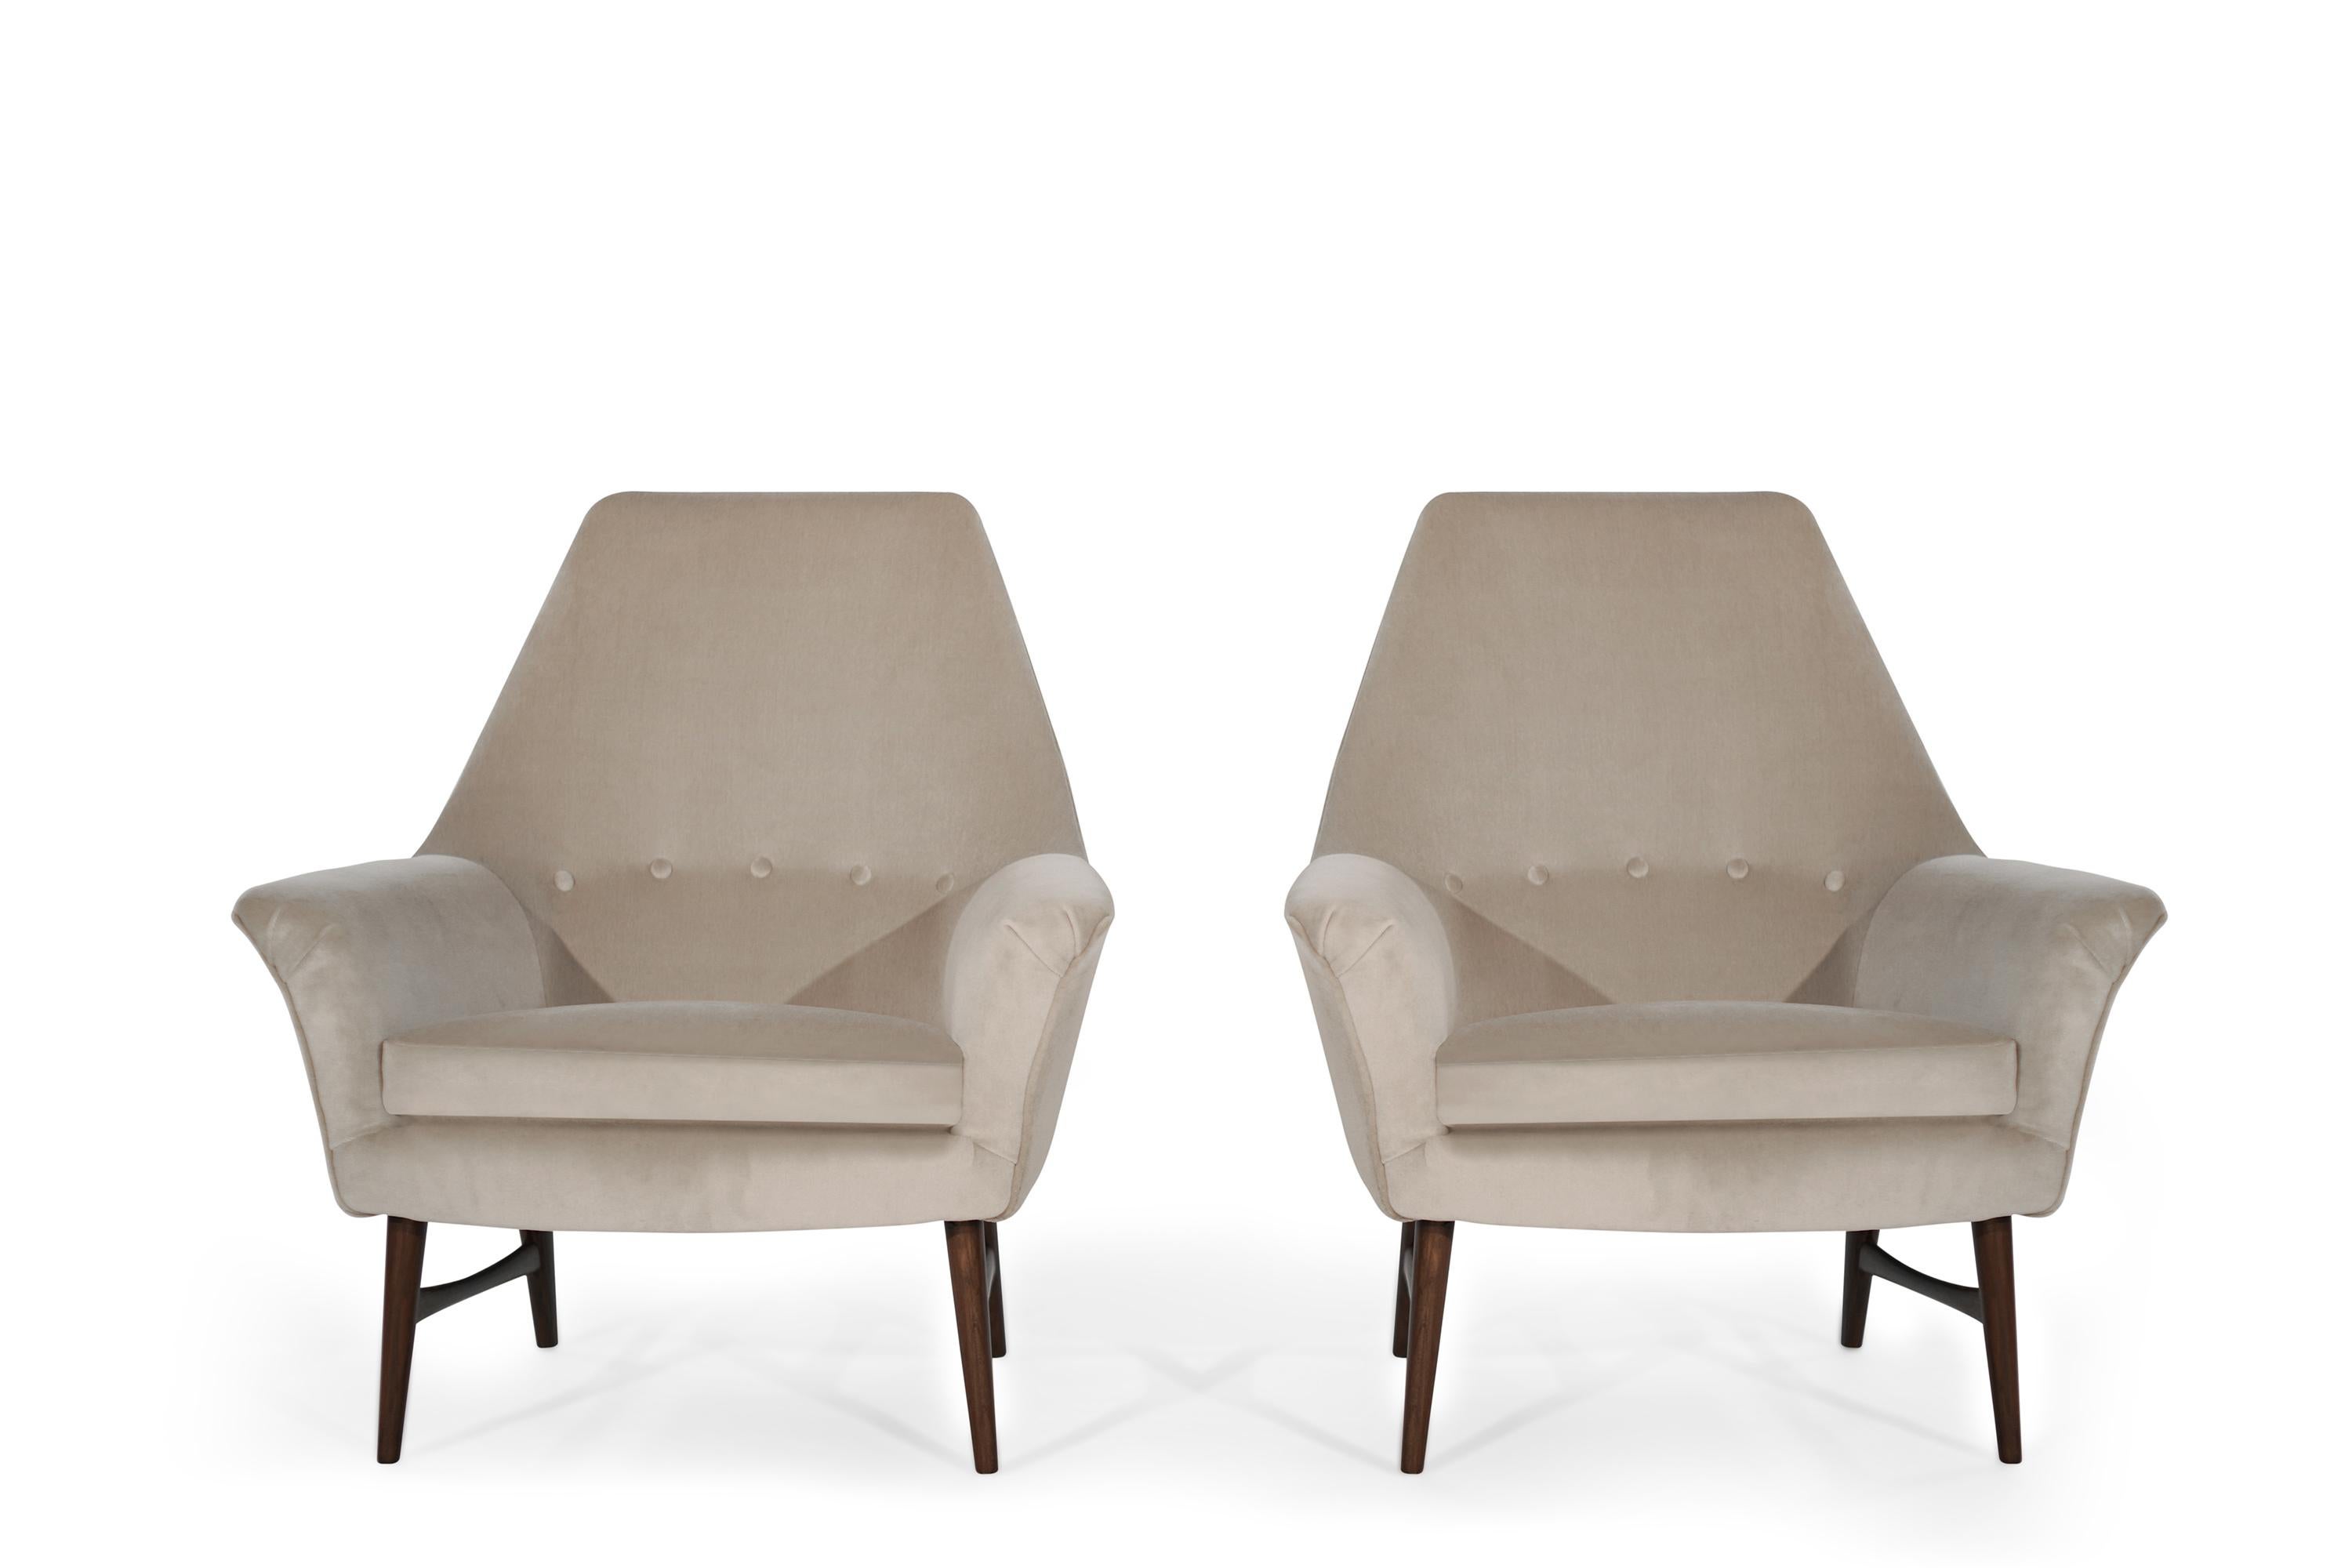 20th Century High-Back Lounge Chairs by Oscar Langlo in Alpaca Velvet, Norway, 1950s